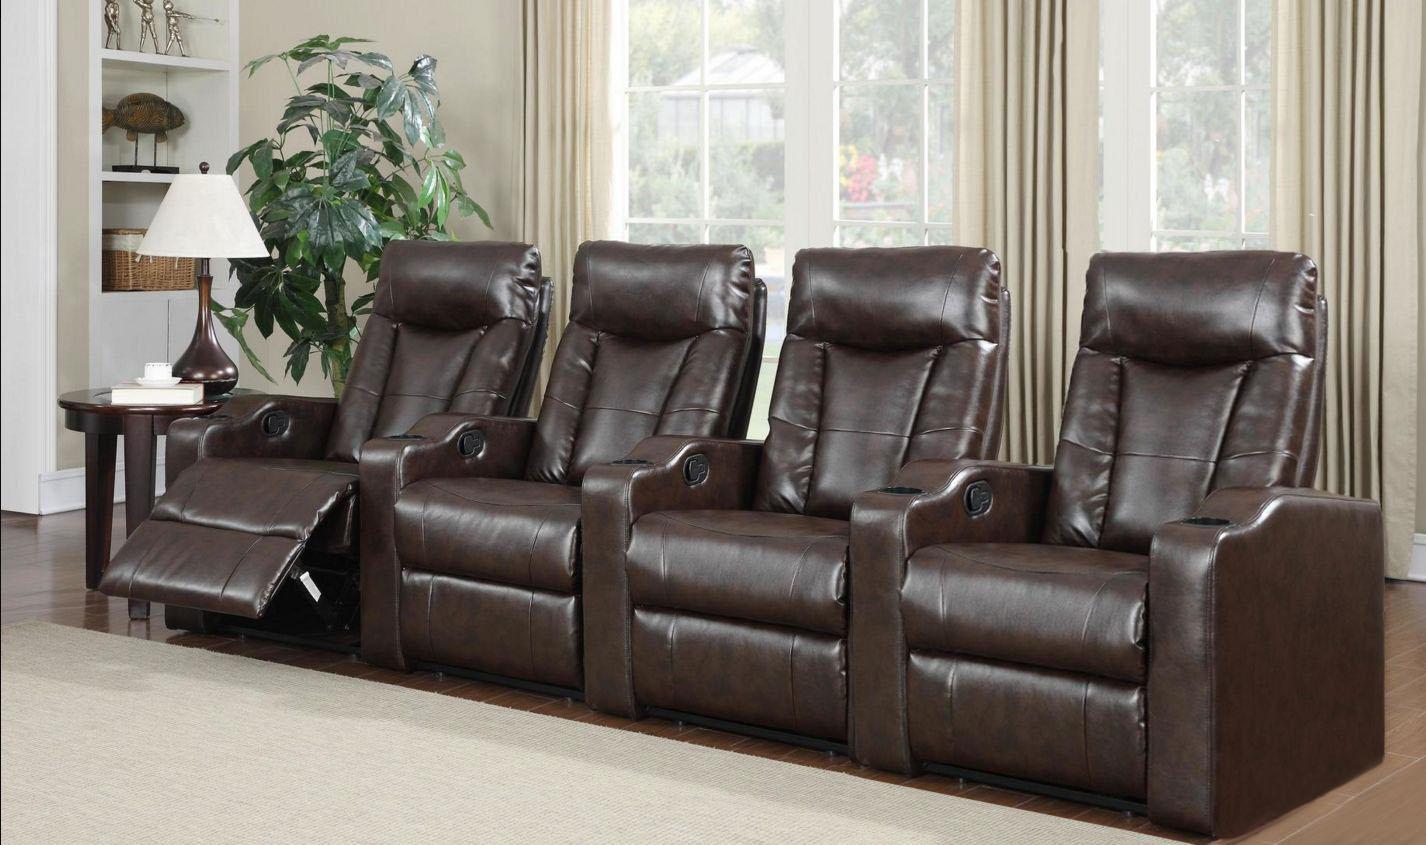 

    
Soflex Noor Brown Bonded Leather Reclining Home Theater Seating Row of 4 Seats
